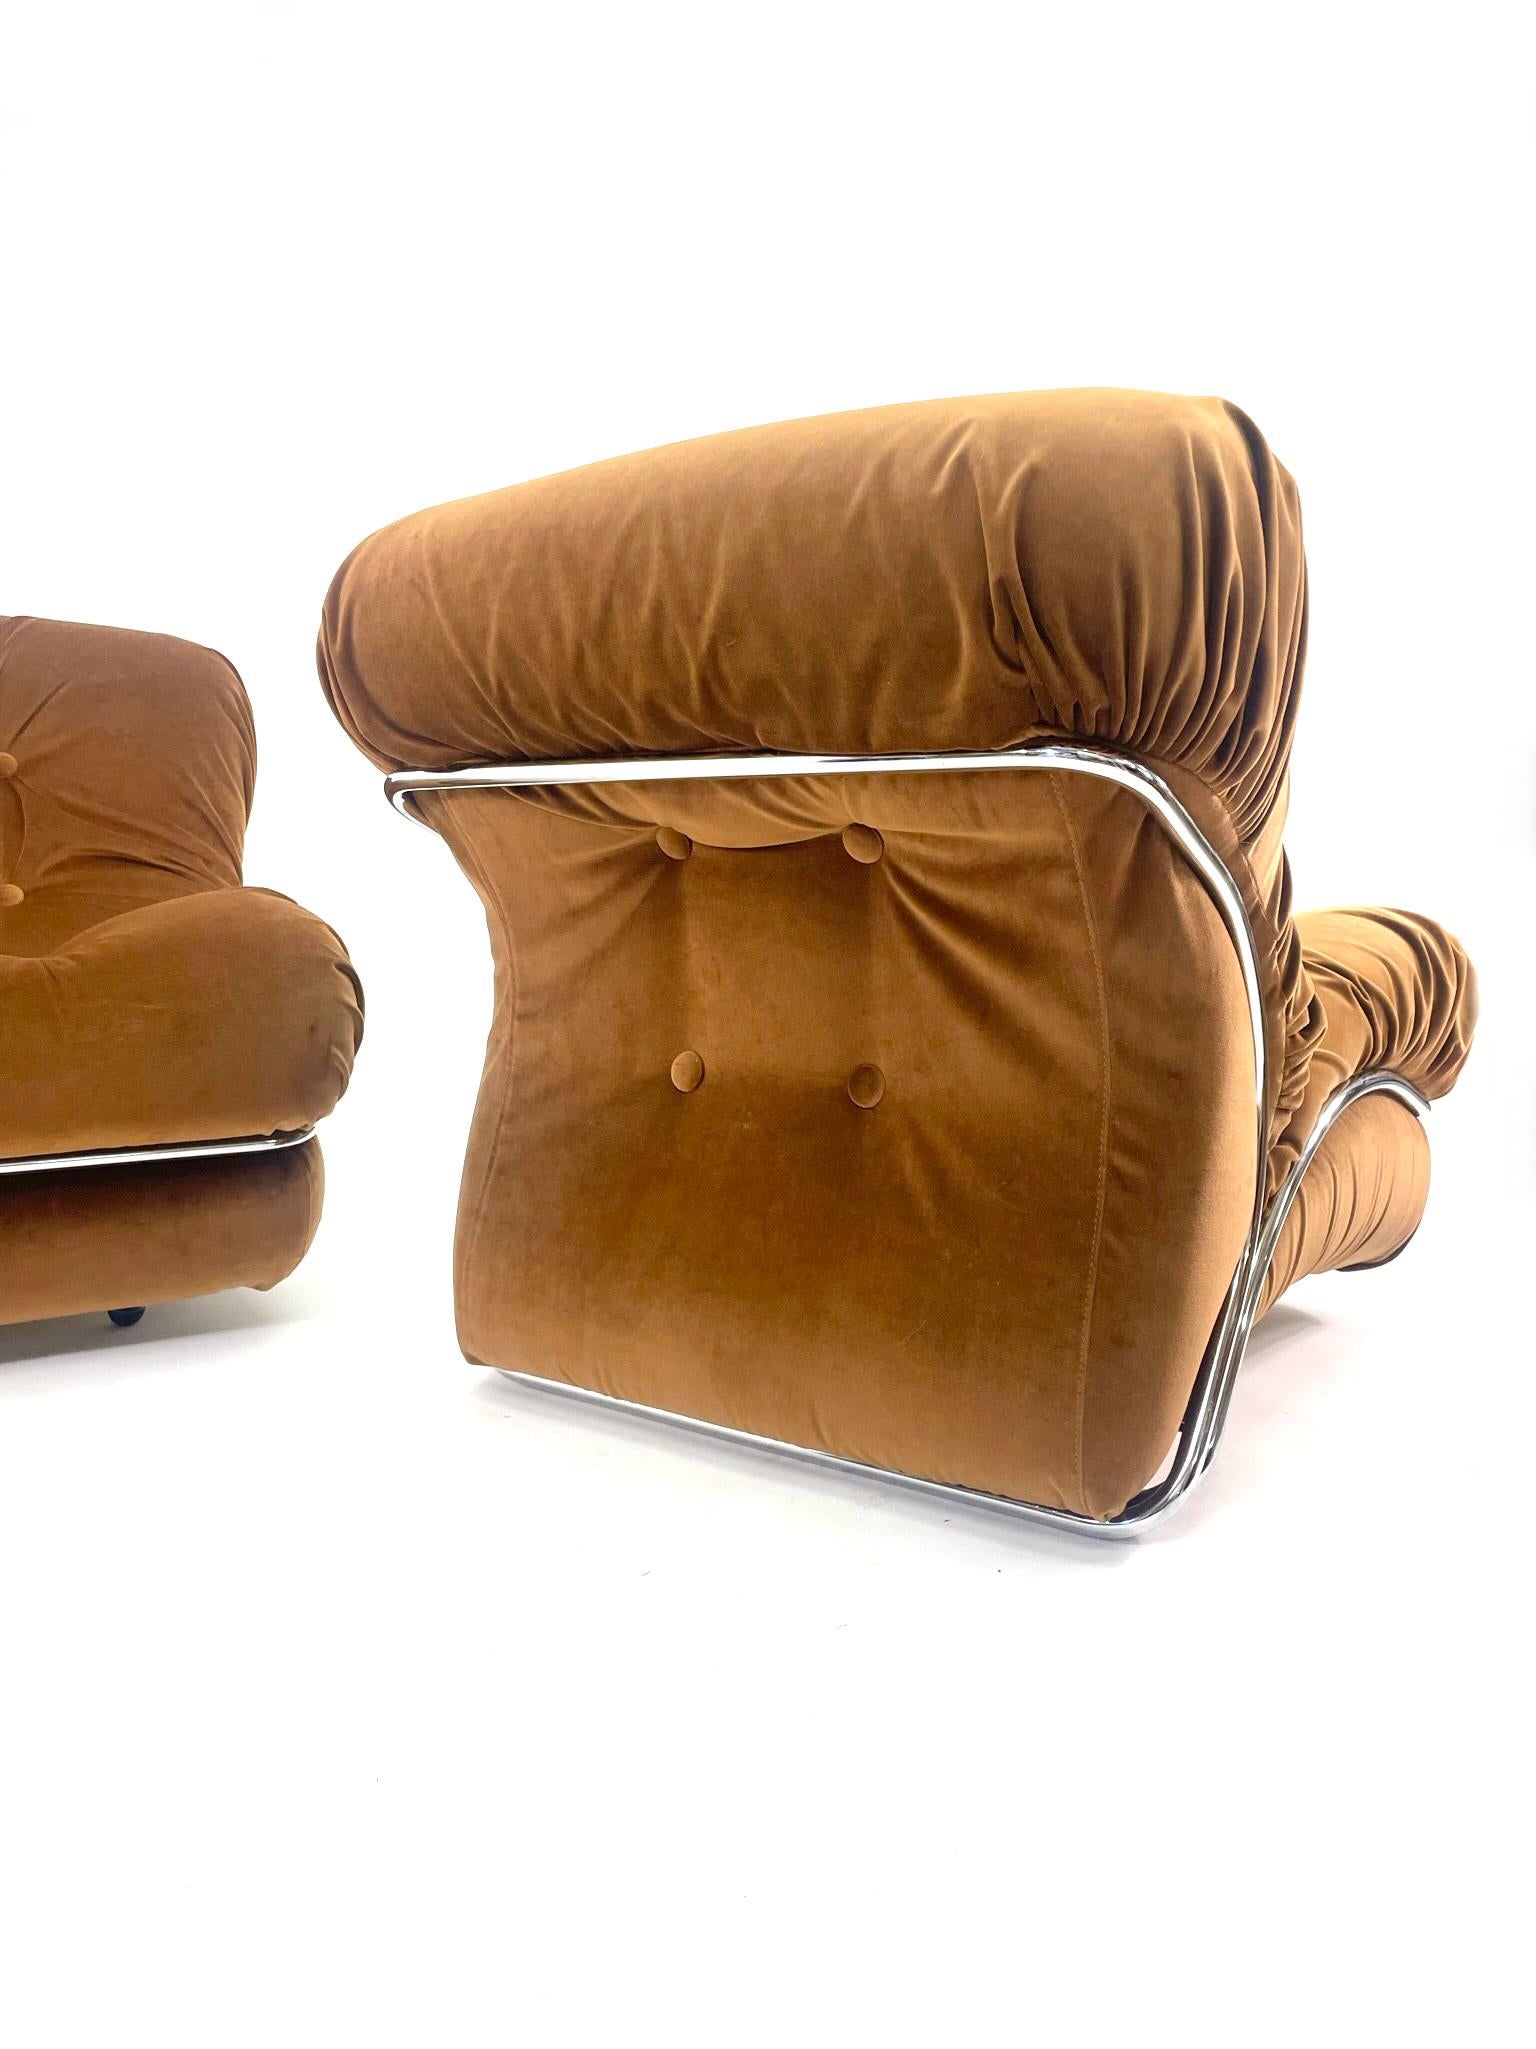 I.P.E. 'Corolla' Lounge Chair (2 available) For Sale 4